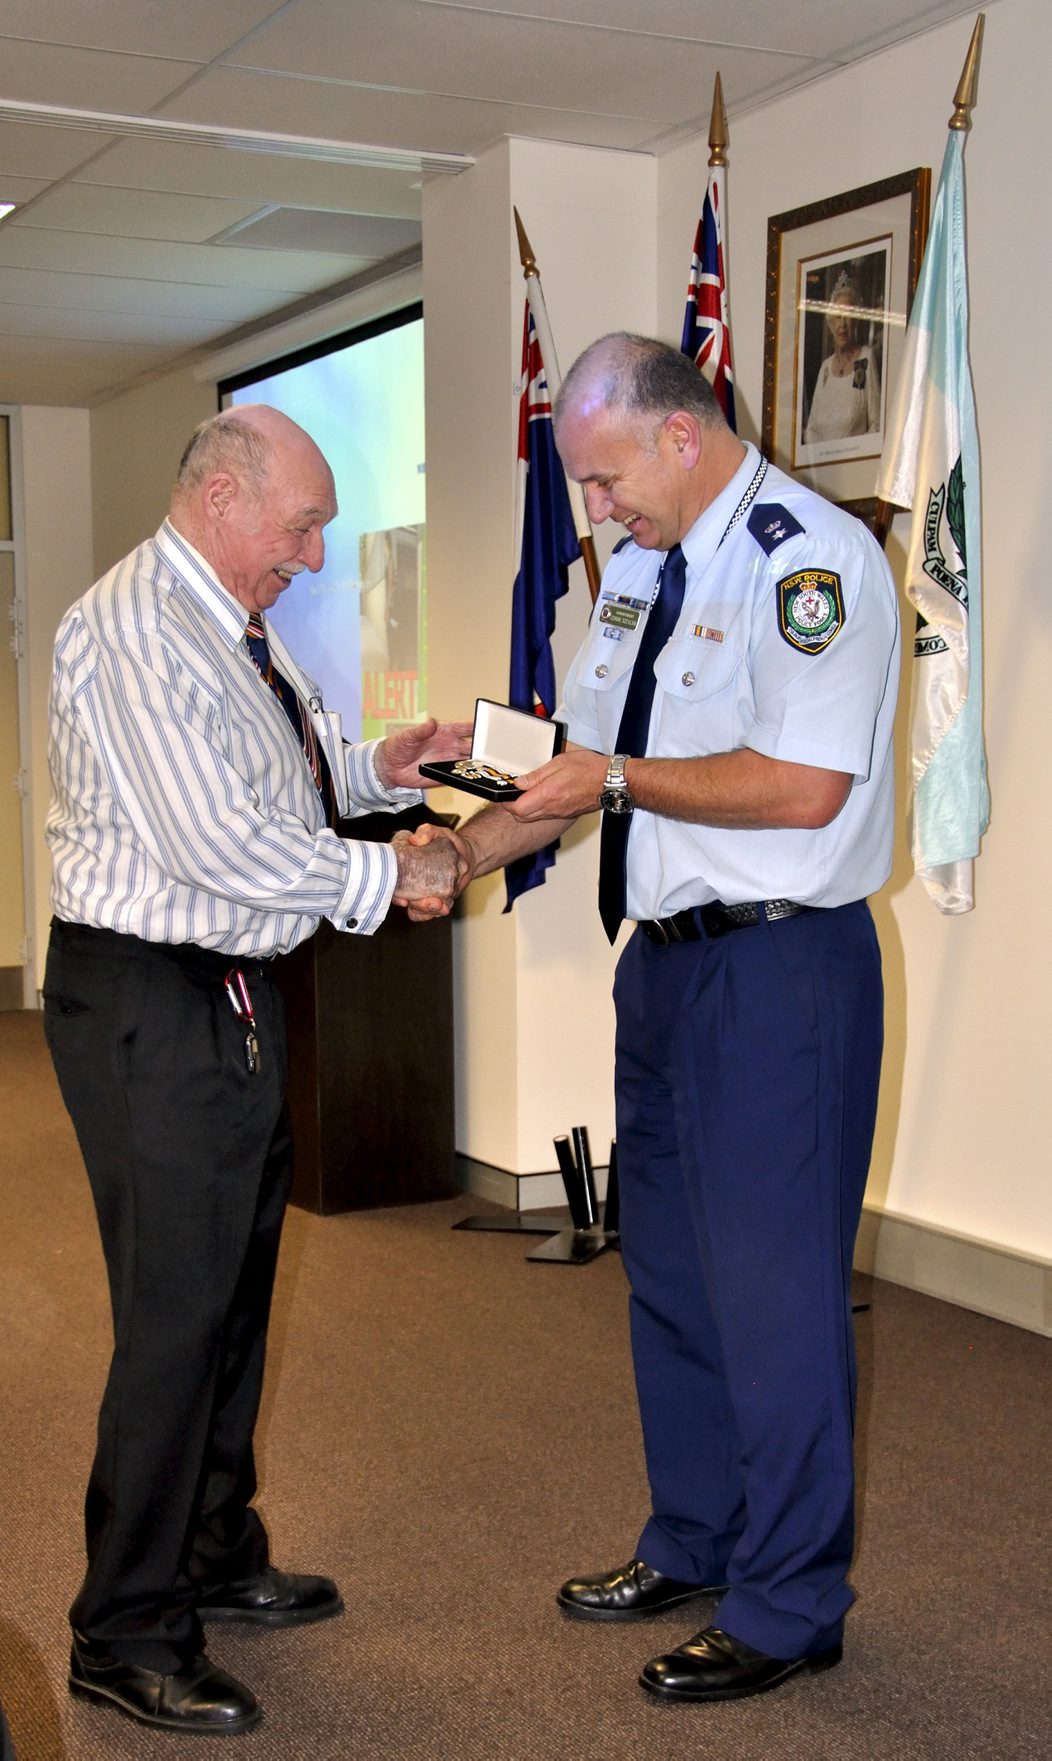 Sid AXAM receiving his National Police Service Medal at Retired Police Day - Lake Illawarra Police Station on 8 September 2016 by acting Local Area Commander, Supt. Zoran Dzevlan.